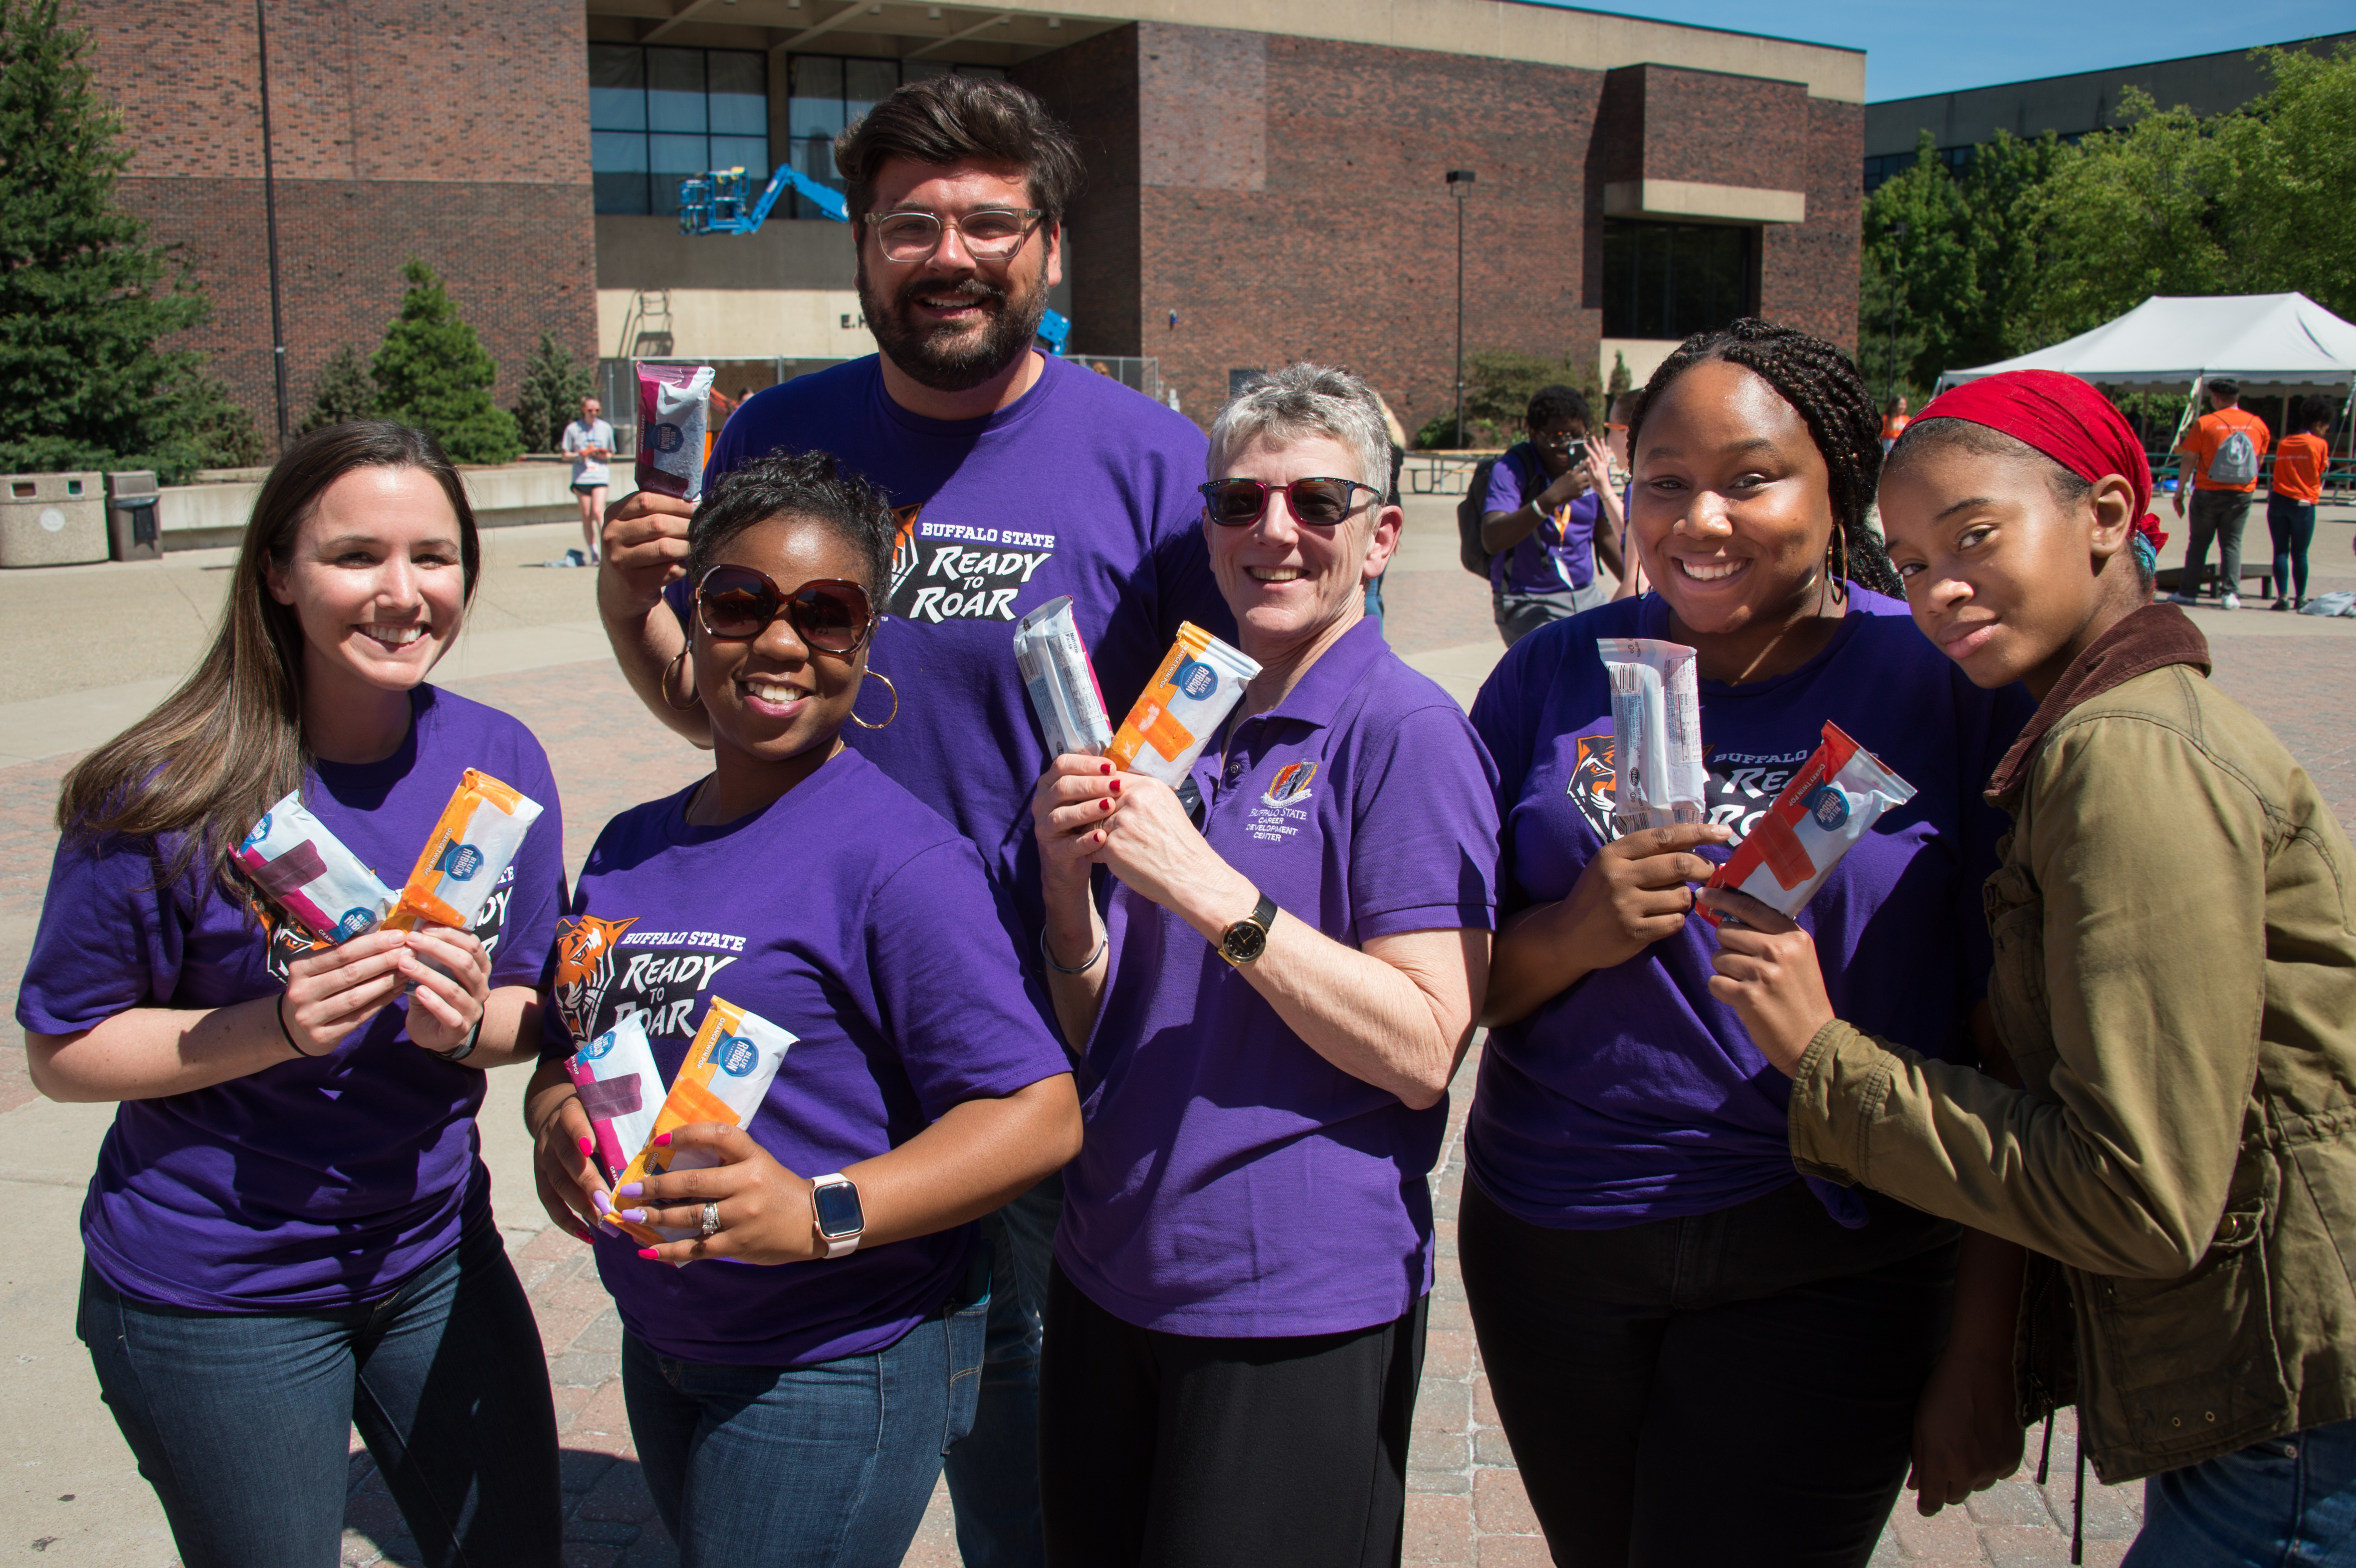 Cate Vivacqua, Tiffany Rose, Nick Fronczak, Stephanie Zuckerman-Aviles, Elaine Flowers, and Tiffany Easy giving out icecream to new students at orientation.